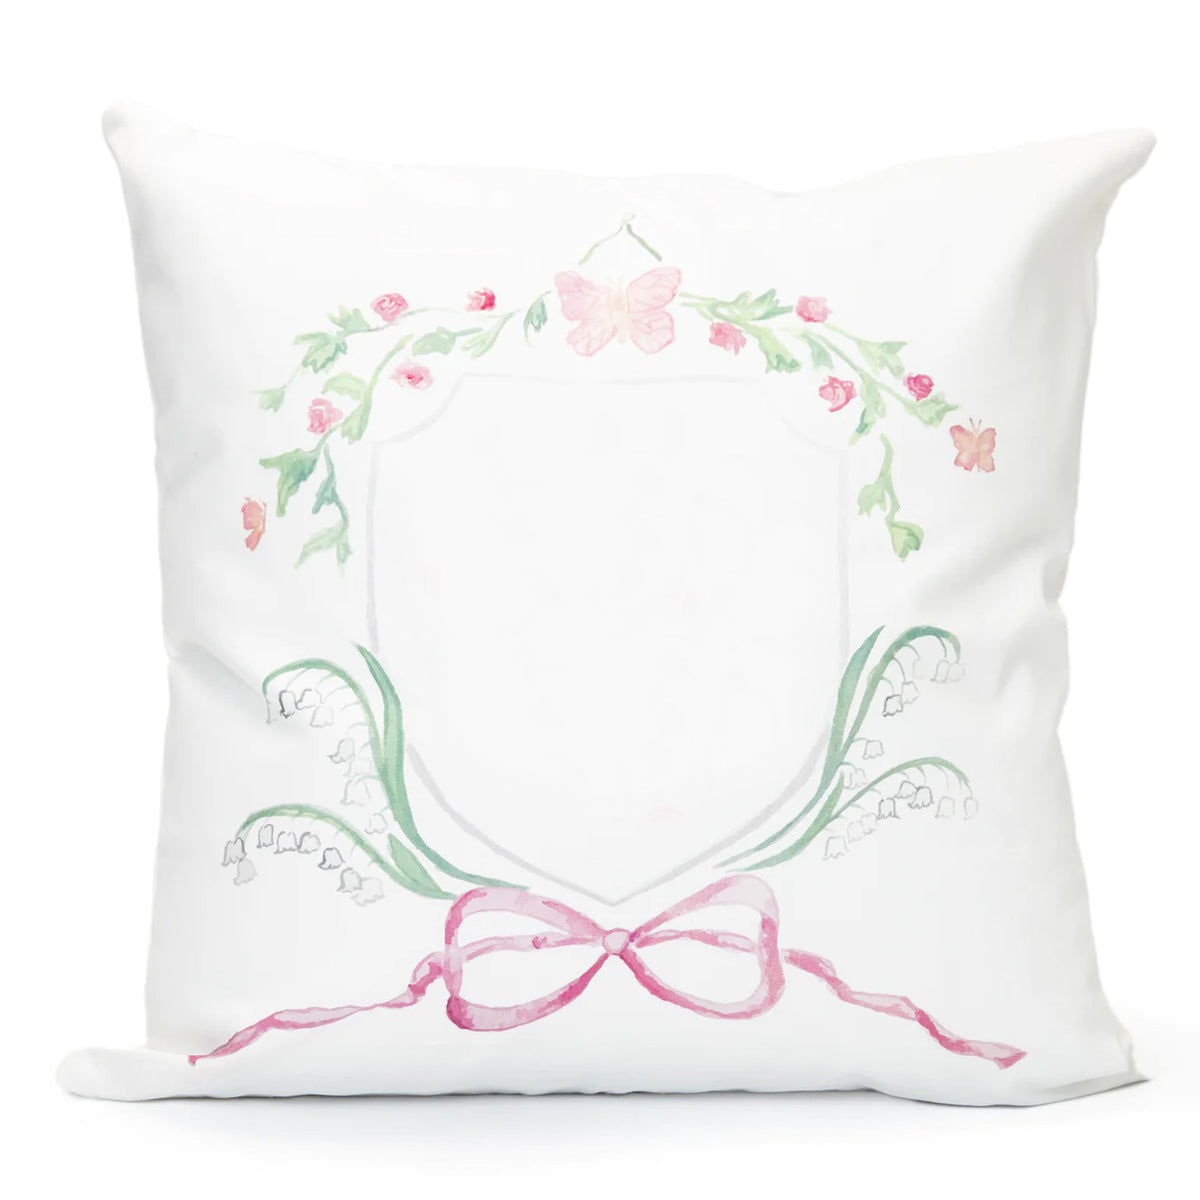 Pink Butterfly Crest Pillow with Insert Over the Moon Gift